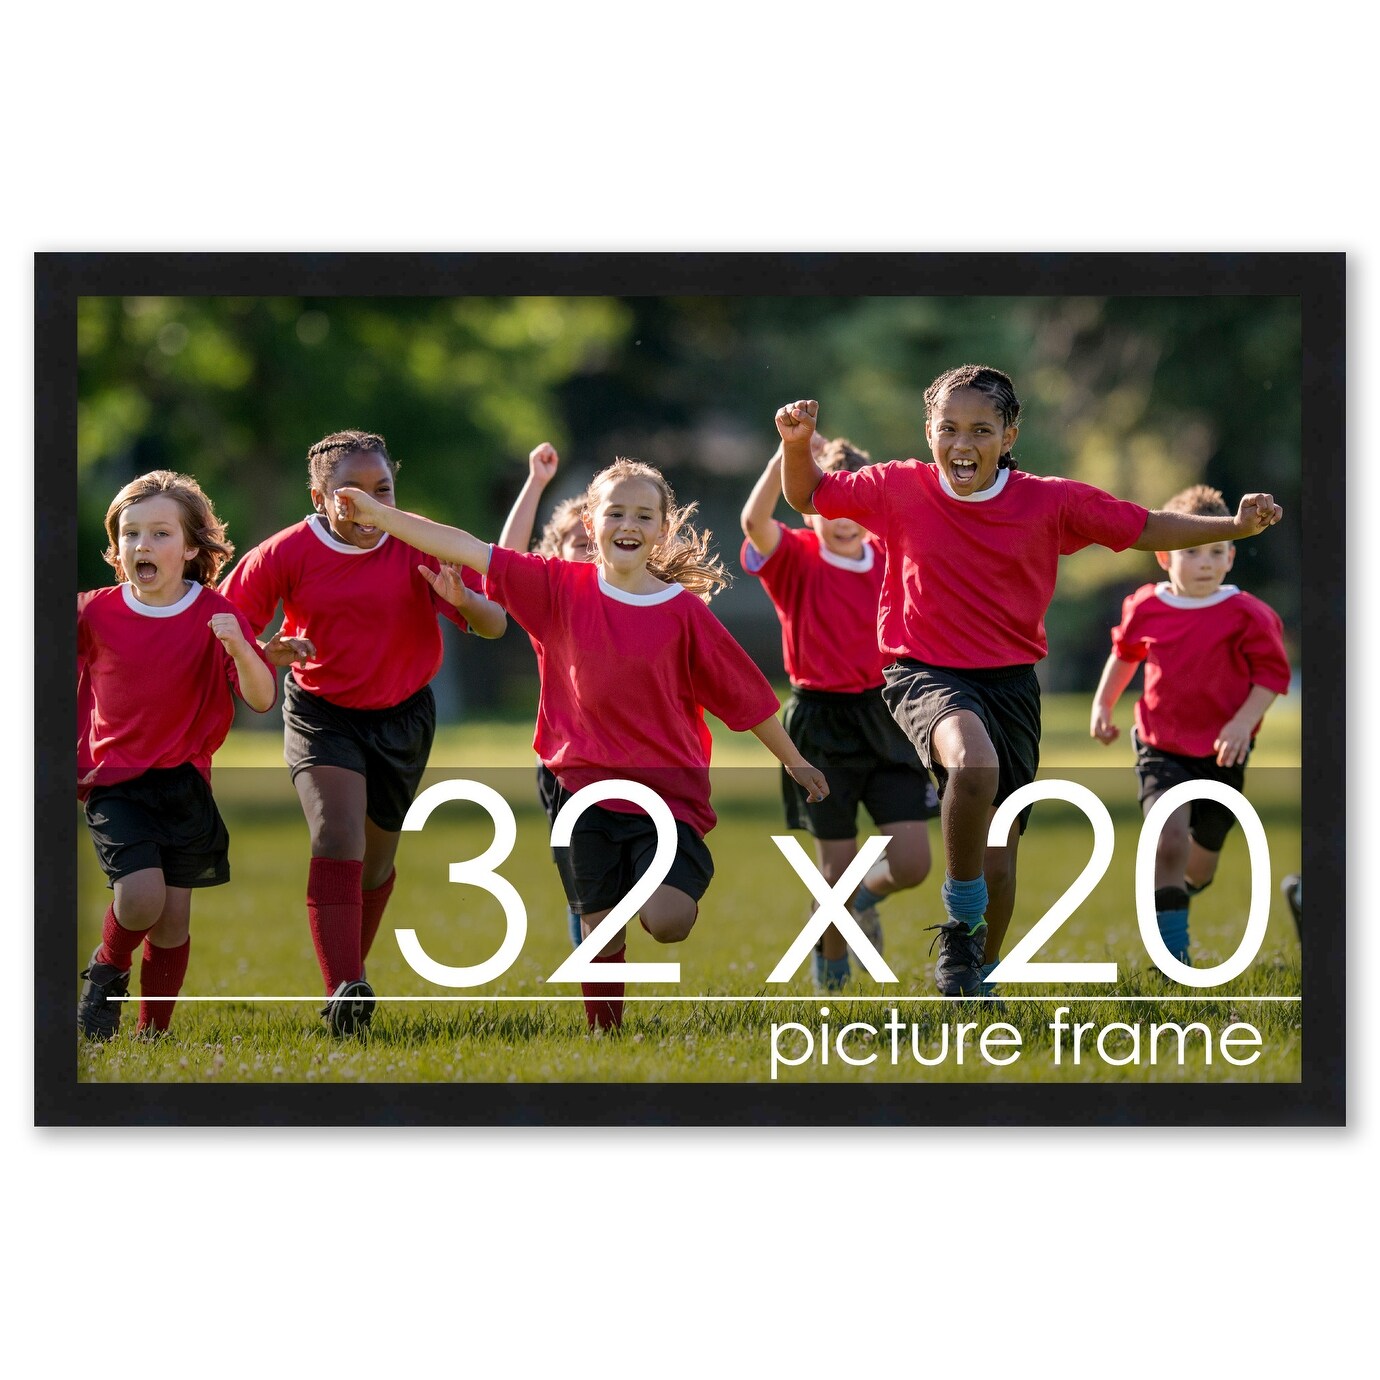 20x32 Contemporary Black Complete Wood Picture Frame with UV Acrylic, Foam Board Backing, & Hardware